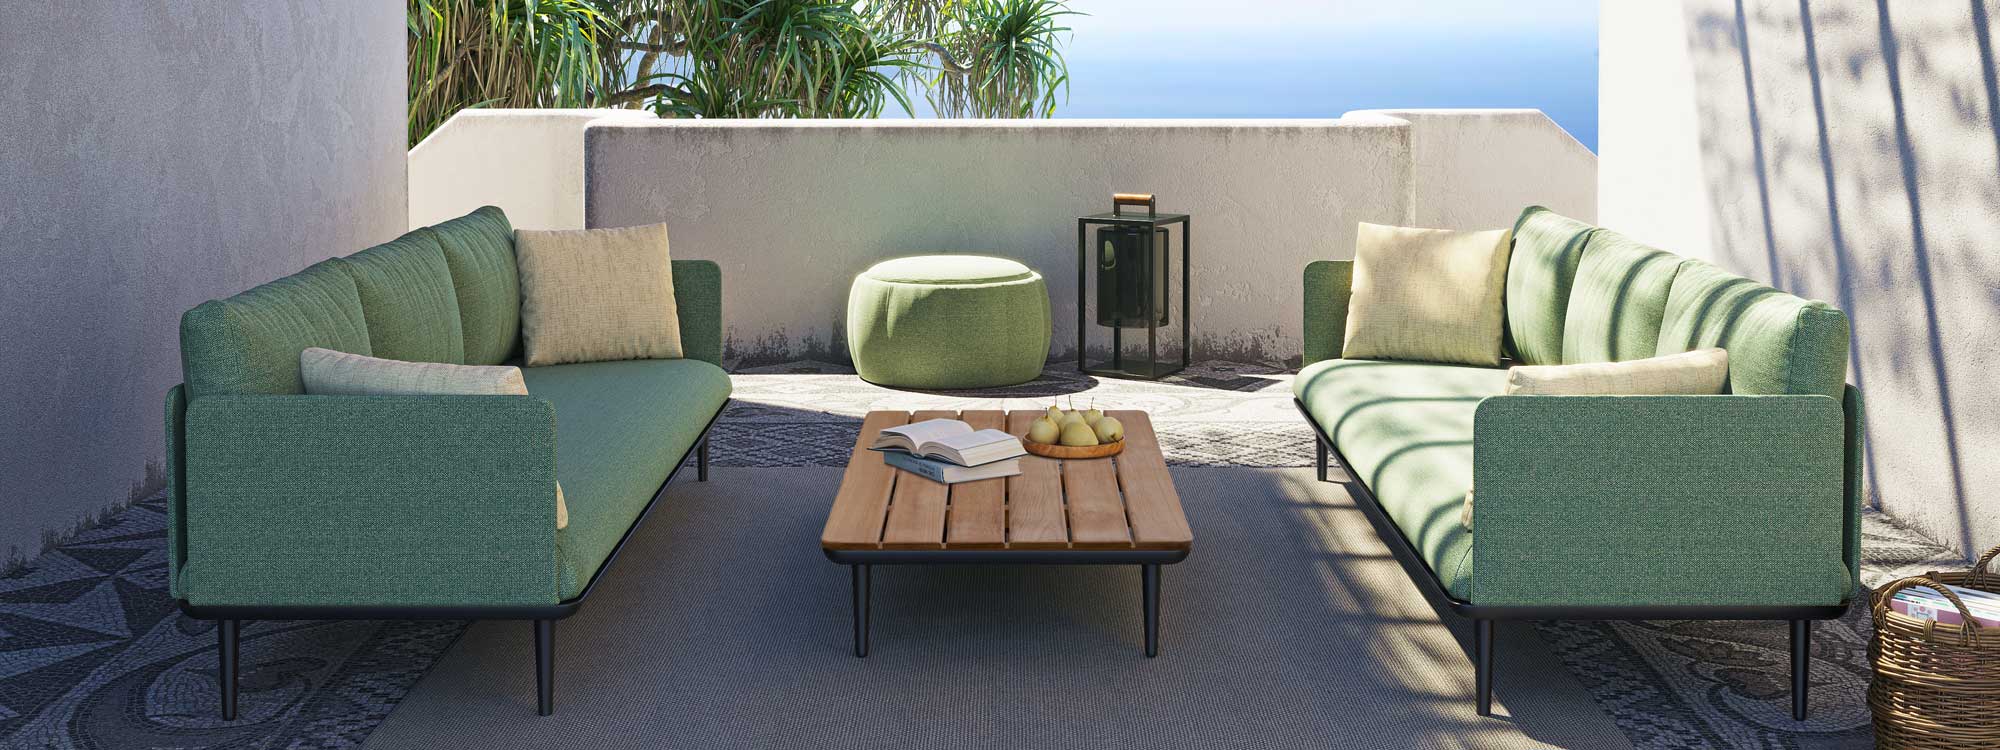 Styletto olive green garden sofas on carpeted outdoor terrace with azure sea in background